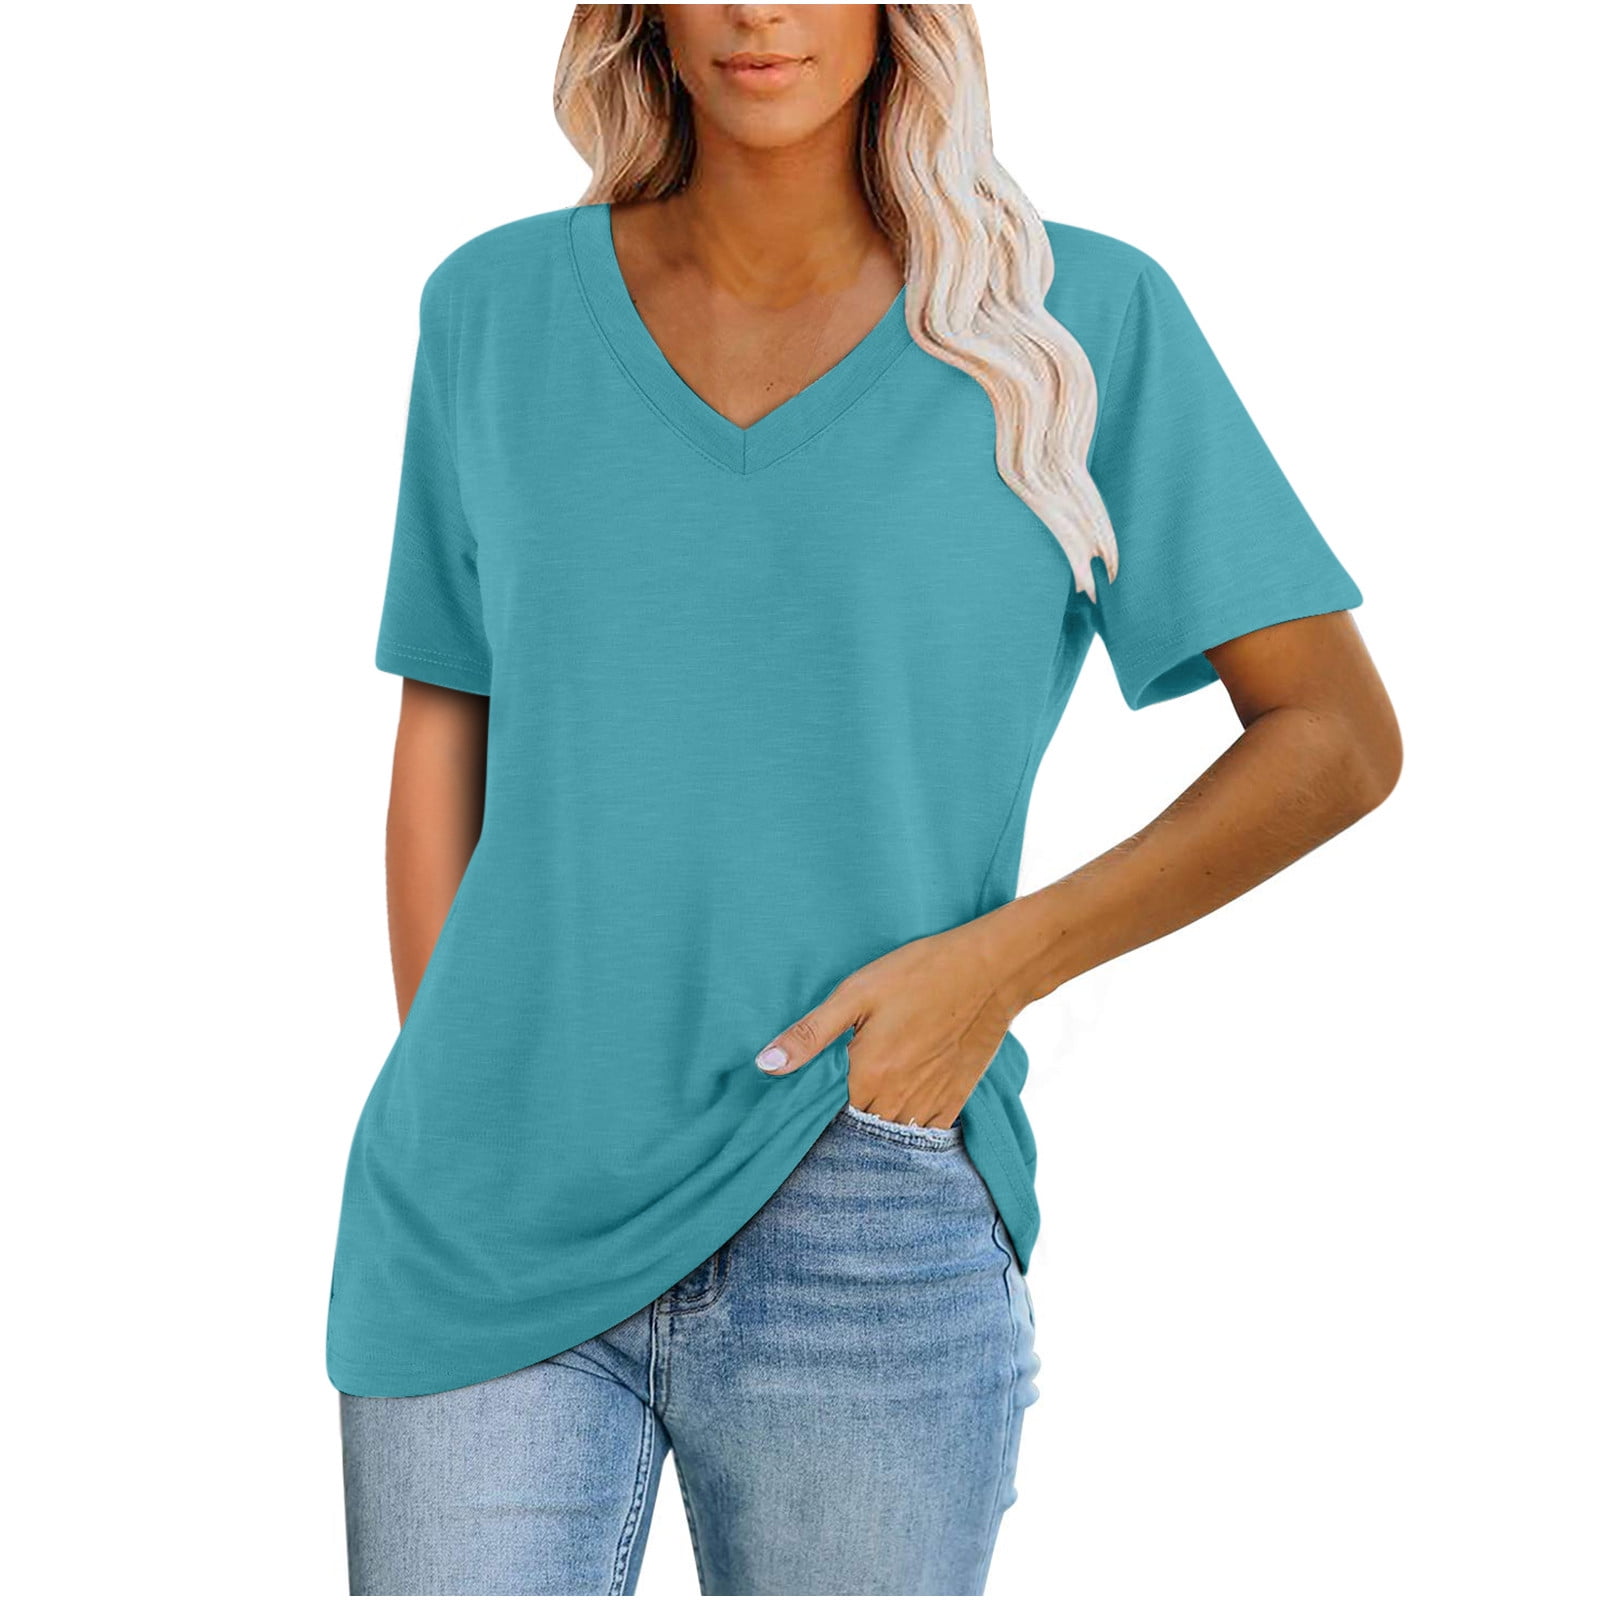 Aueoeo Womens Tunic Tops To Wear With Leggings, Women's Summer